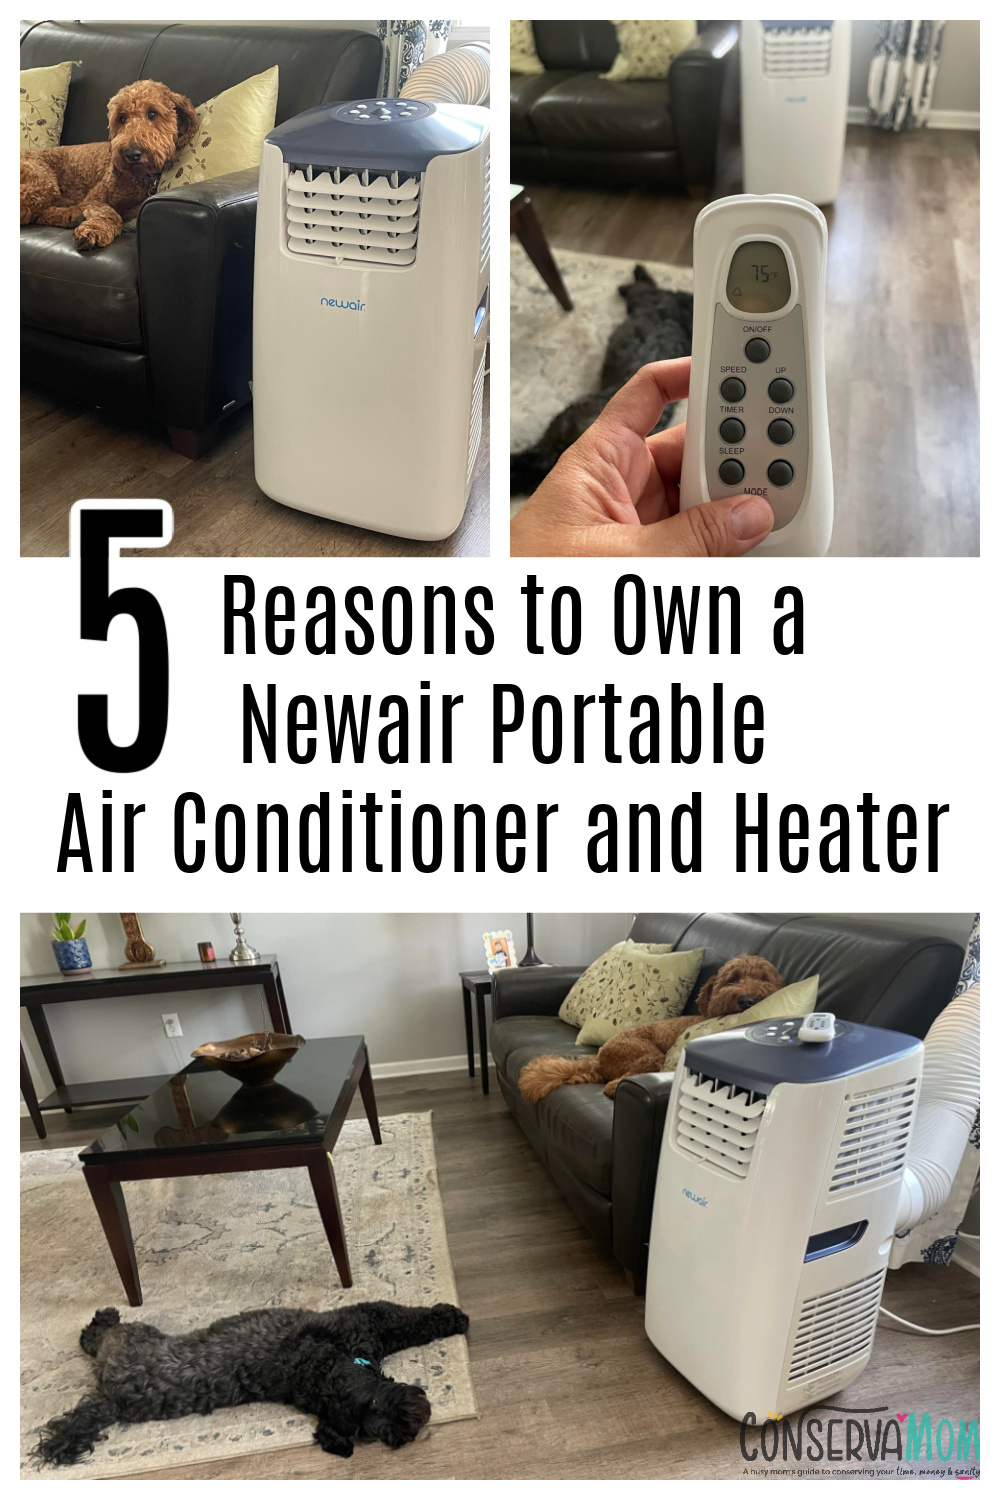 Reasons to Own a Newair Portable Air Conditioner and Heater